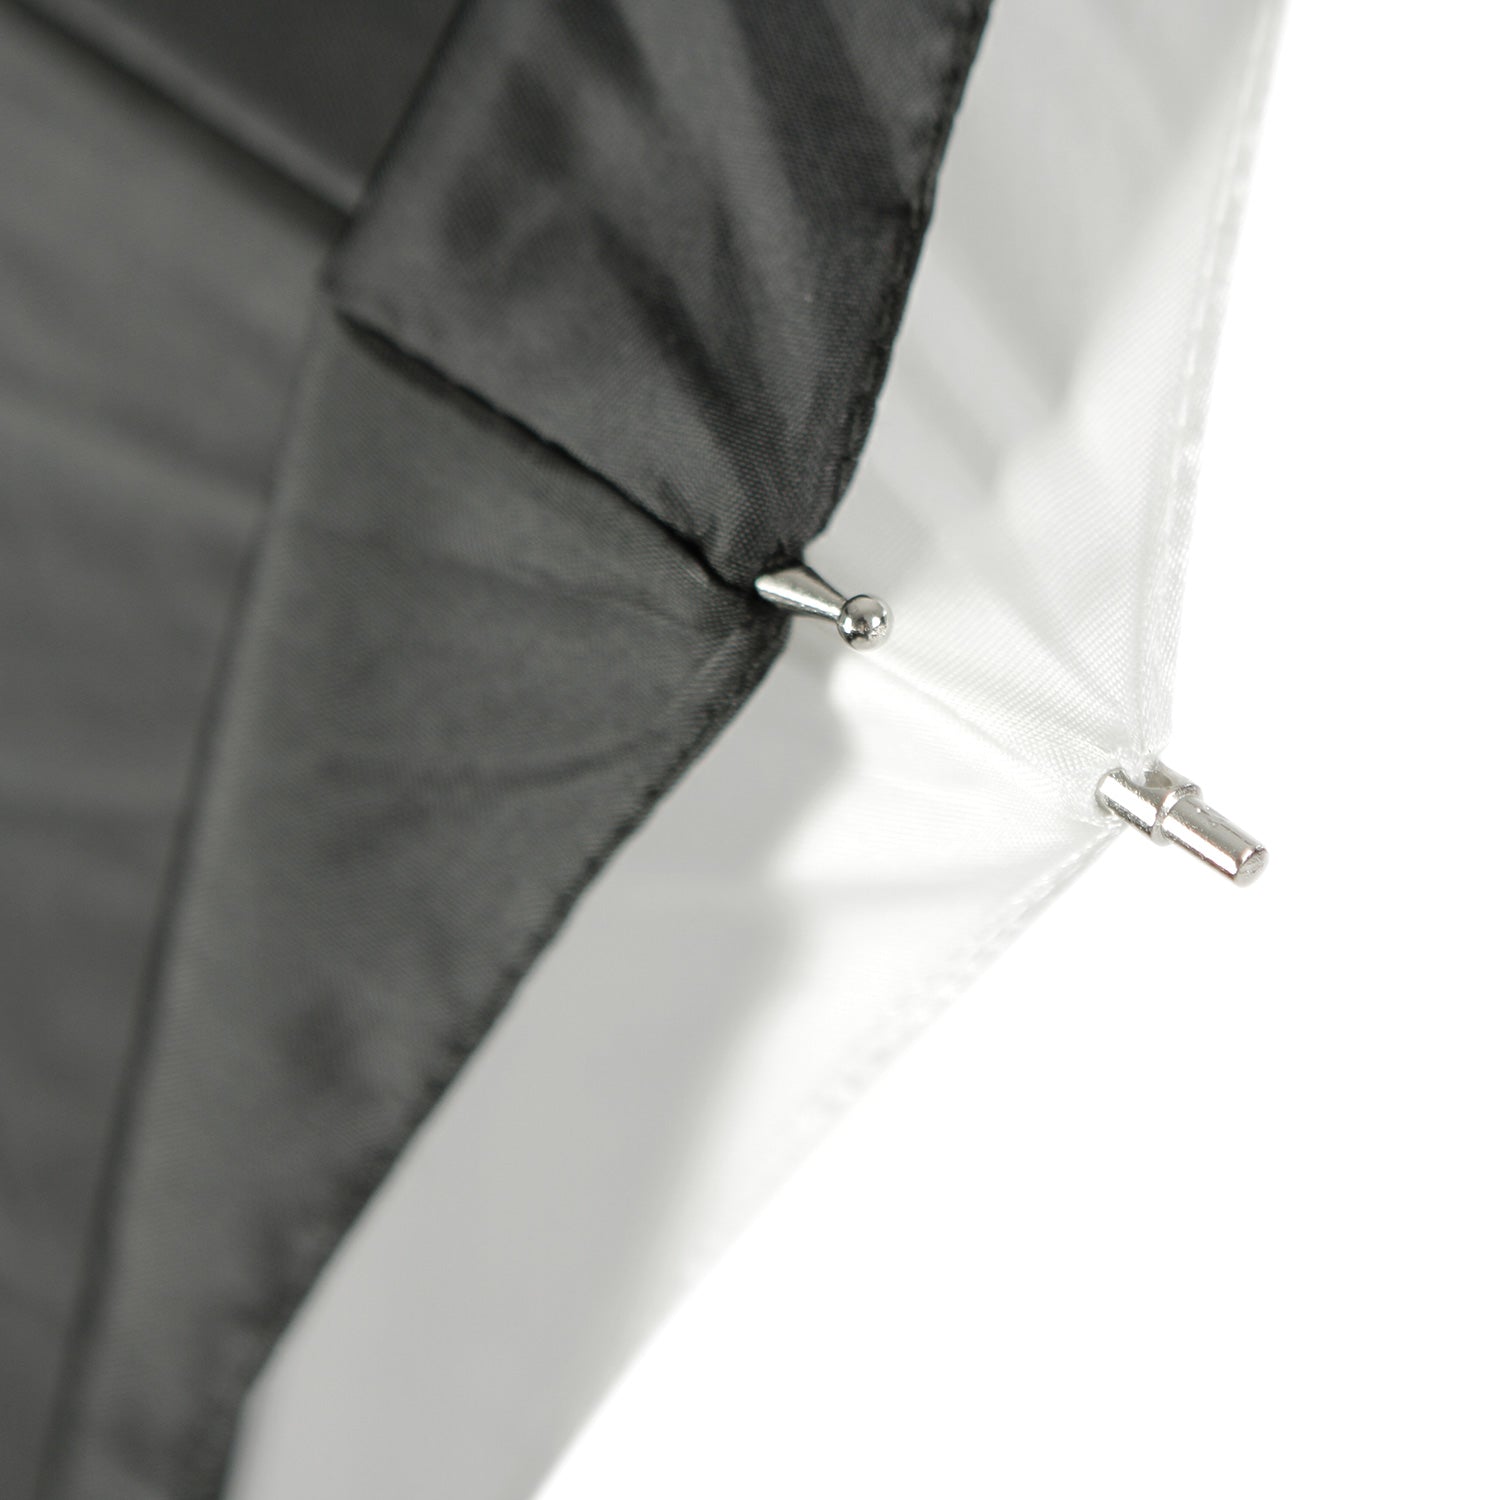 Convertible Umbrella - Optical White Satin with Removable Black Cover